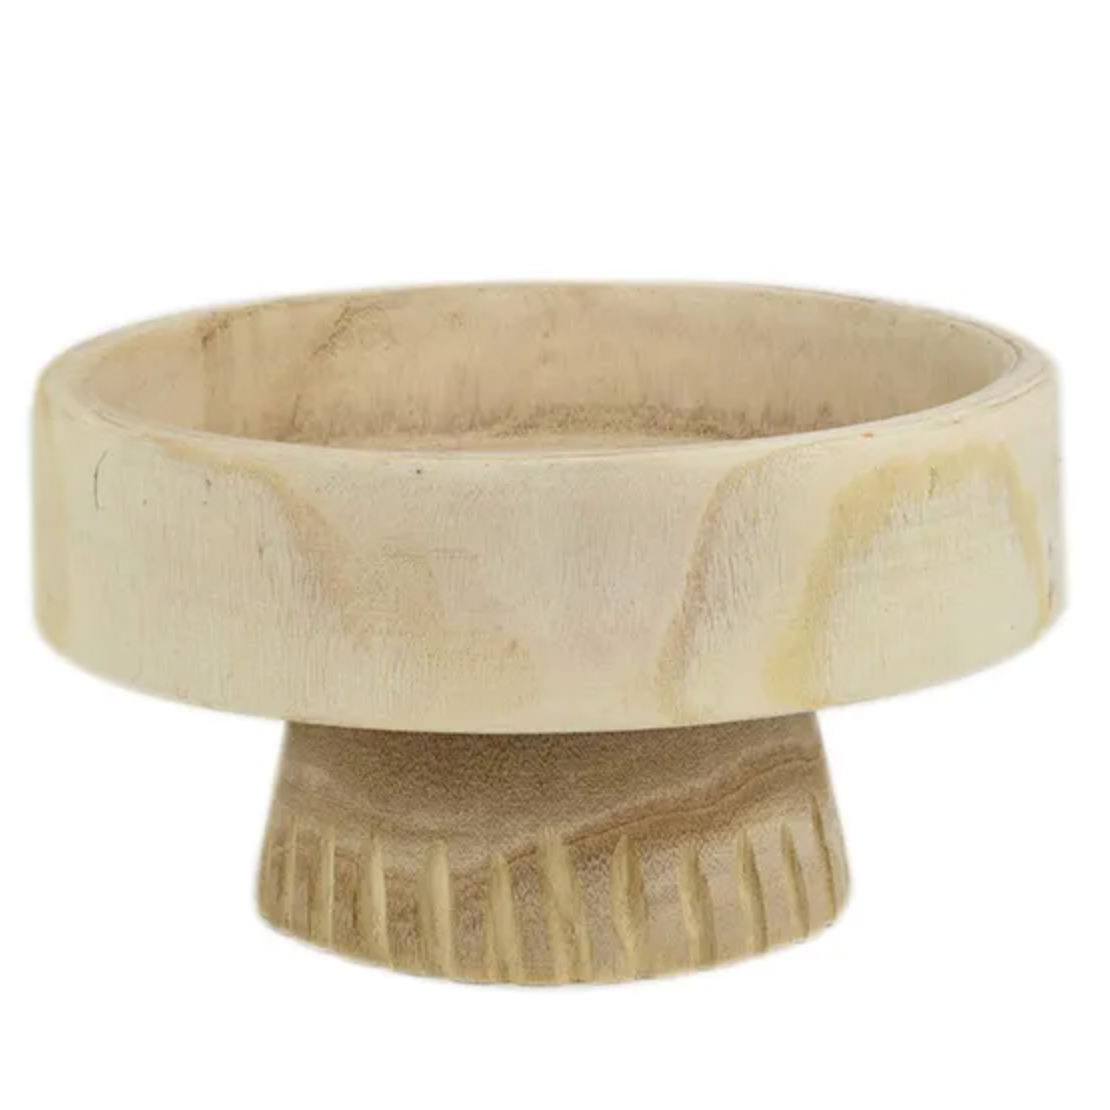 WYATT WOODEN FOOTED BOWL - NATURAL - Daisy Grace Lifestyle